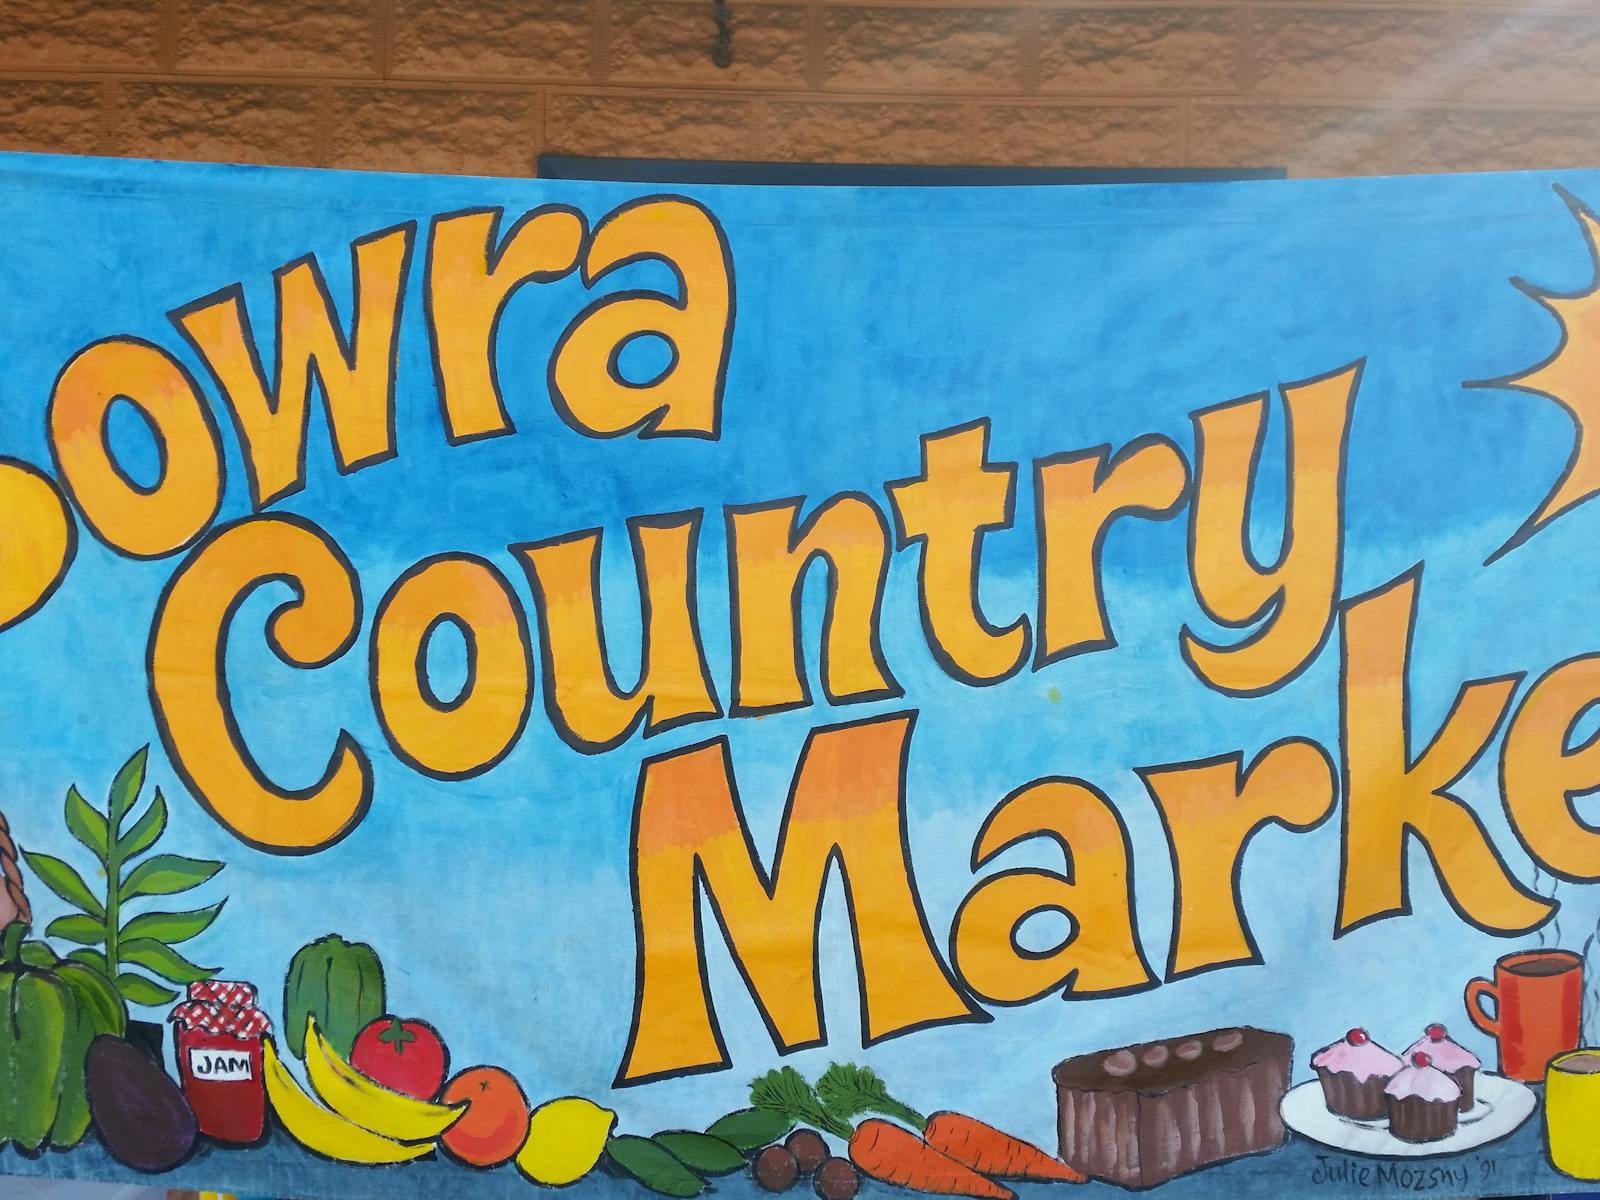 Image for Bowra Country Markets / Saturday Cafe